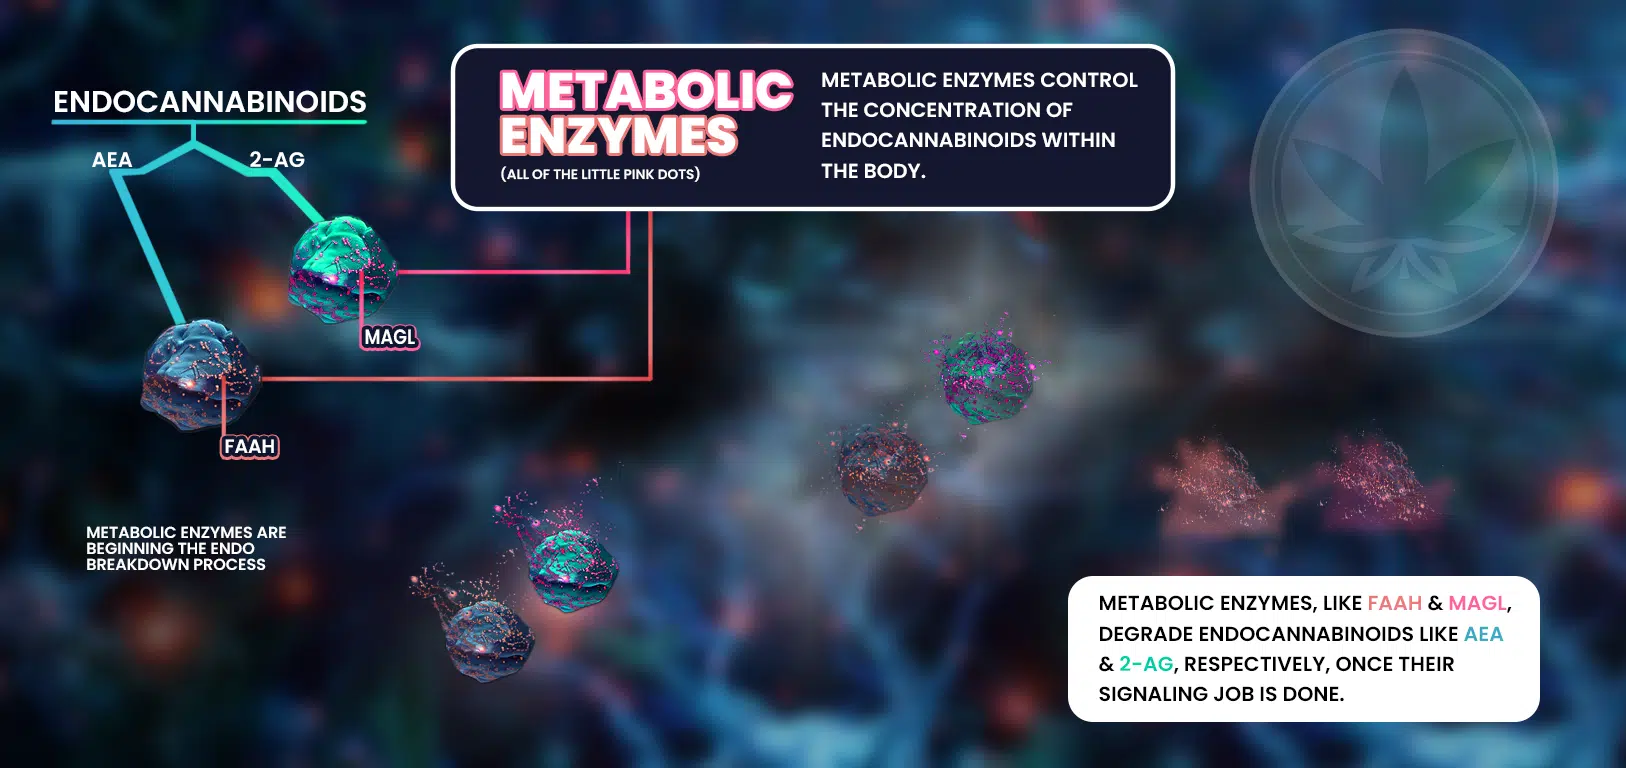 A detailed infographic explaining the breakdown of endocannabinoids by metabolic enzymes. Two molecules labeled aea and 2-ag represent anandamide and 2-arachidonoylglycerol, respectively. They are connected to two other molecules labeled faah and magl, representing the enzymes fatty acid amide hydrolase and monoacylglycerol lipase. The background contains a network of little pink dots symbolizing the metabolic enzymes throughout the body, and text boxes explain that metabolic enzymes control the concentration of endocannabinoids like aea and 2-ag after their signaling job is done. The image also features a cannabis leaf icon, reinforcing the connection to the cannabis plant.